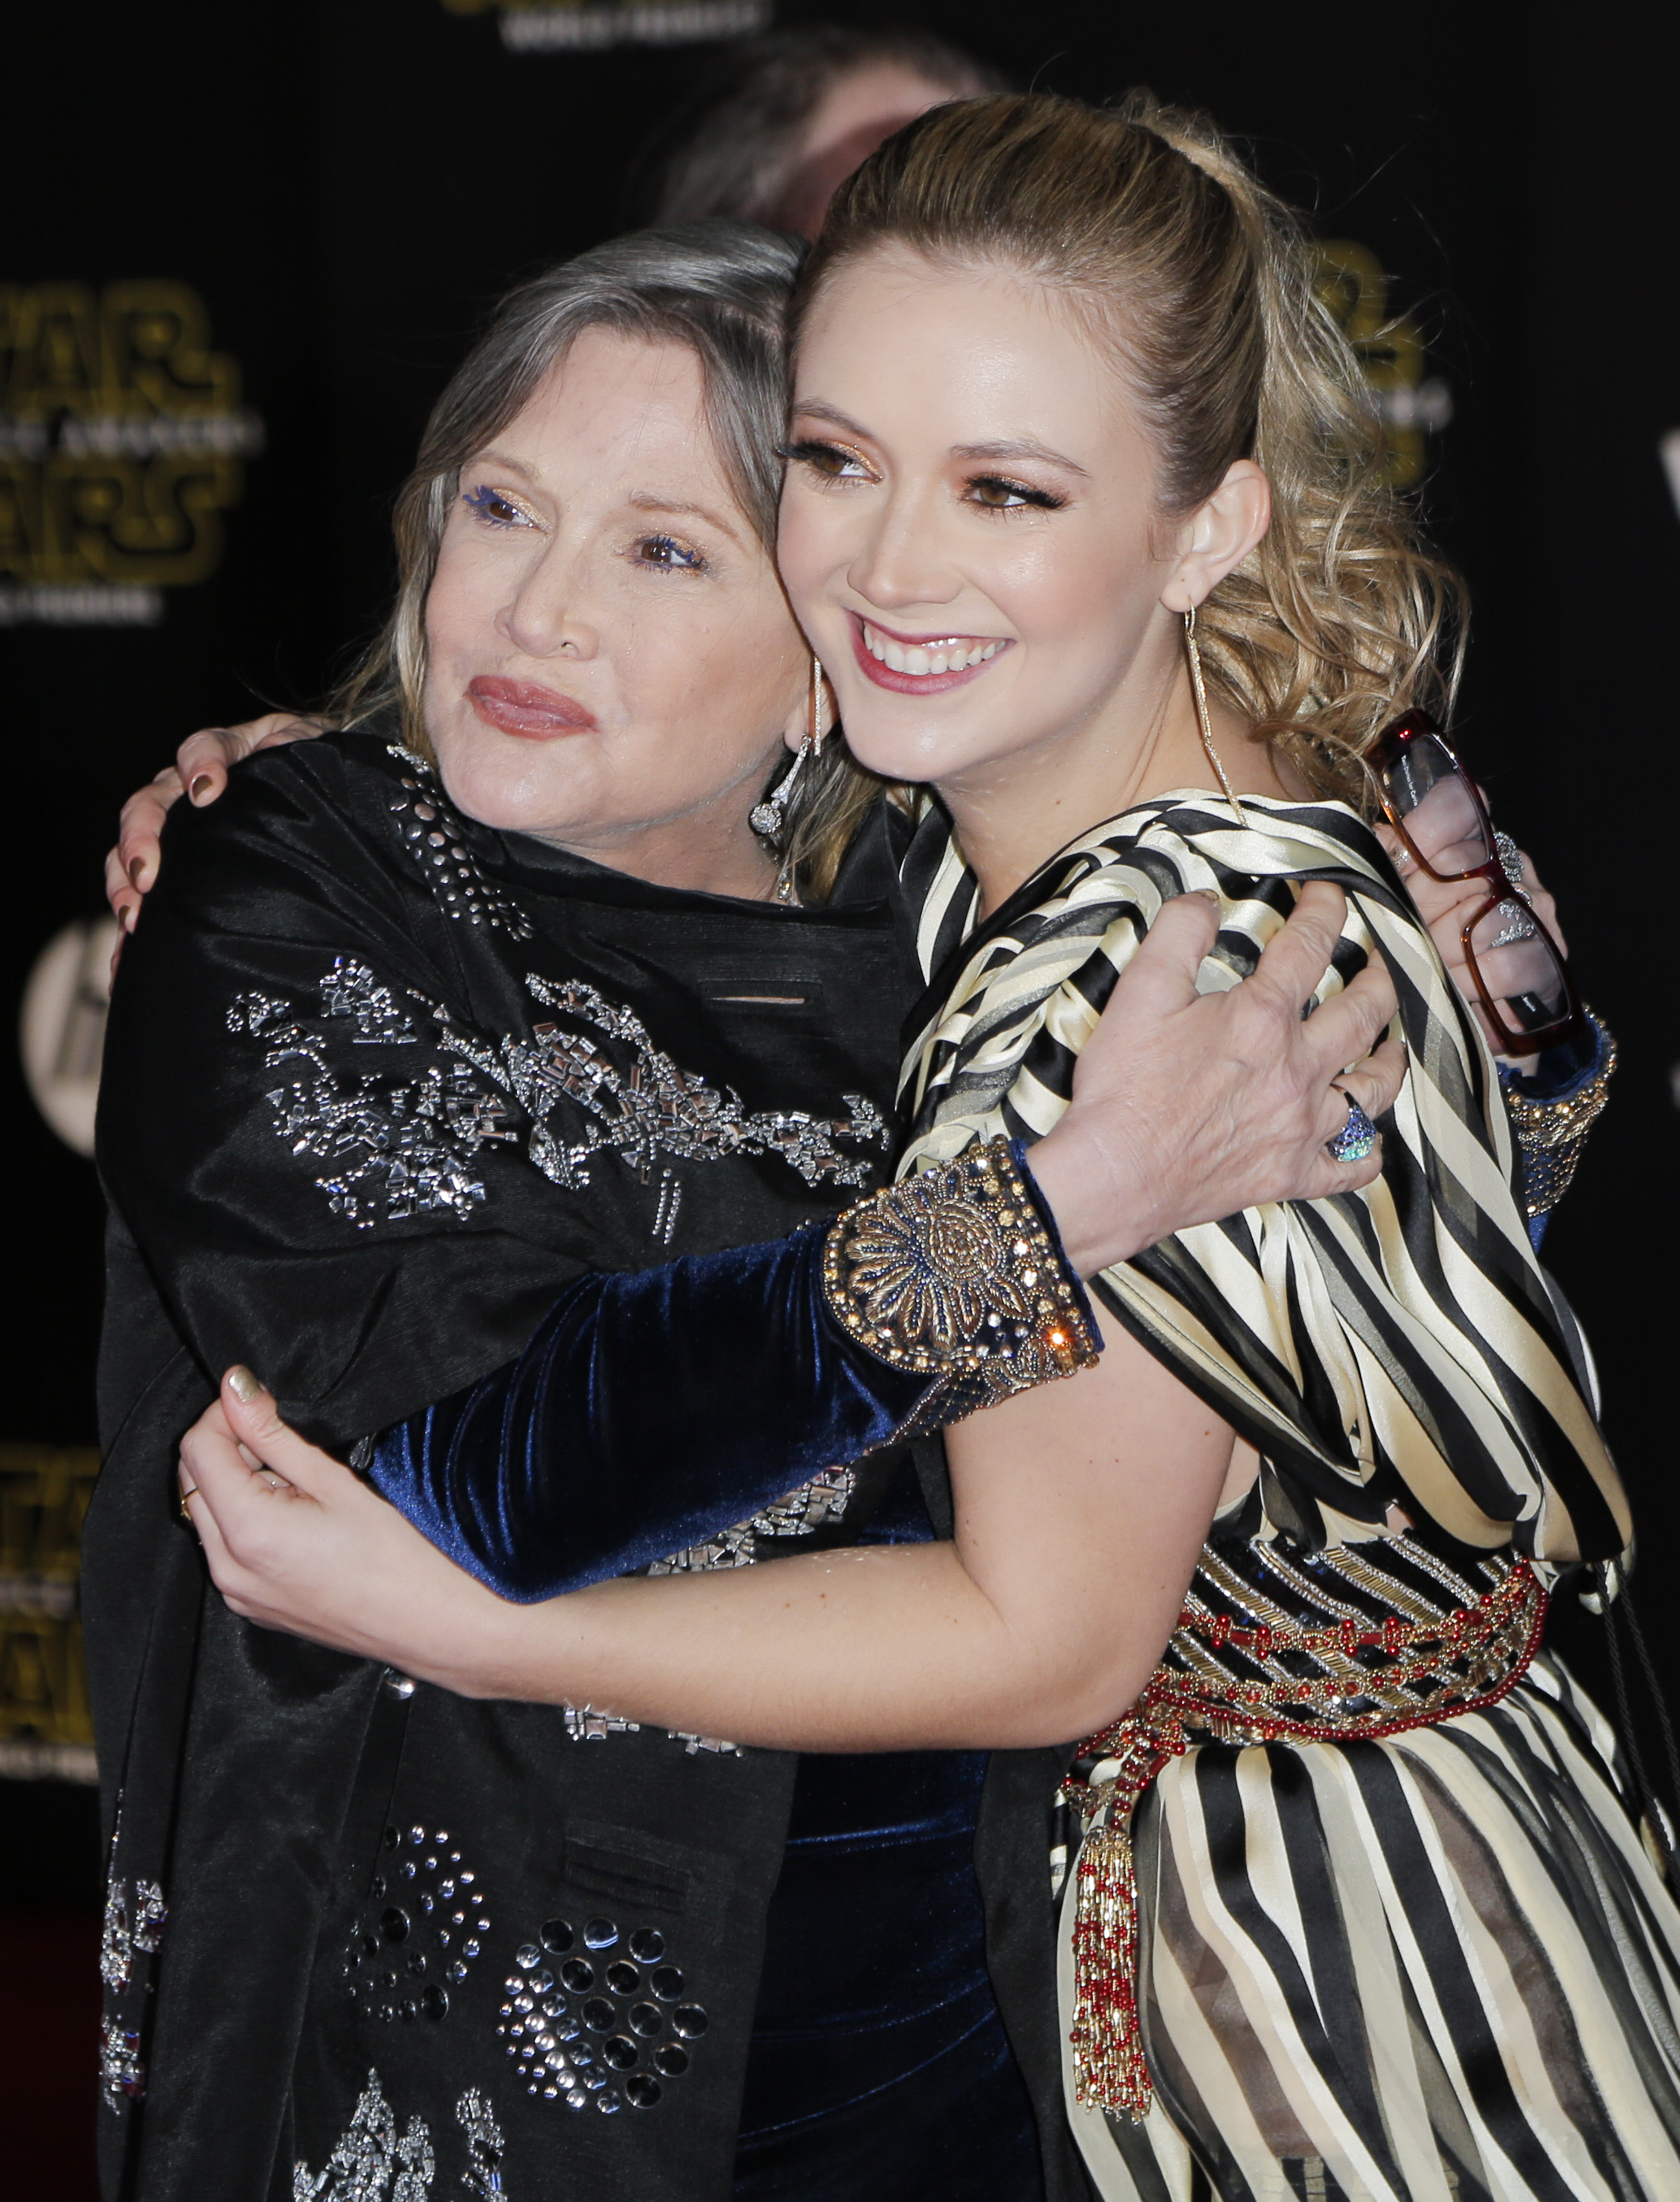 Carrie Fisher and Billie Lourd at the 'Star Wars: The Force Awakens' film premiere, in Los Angeles, America, on December 14, 2015. | Source: Getty Images